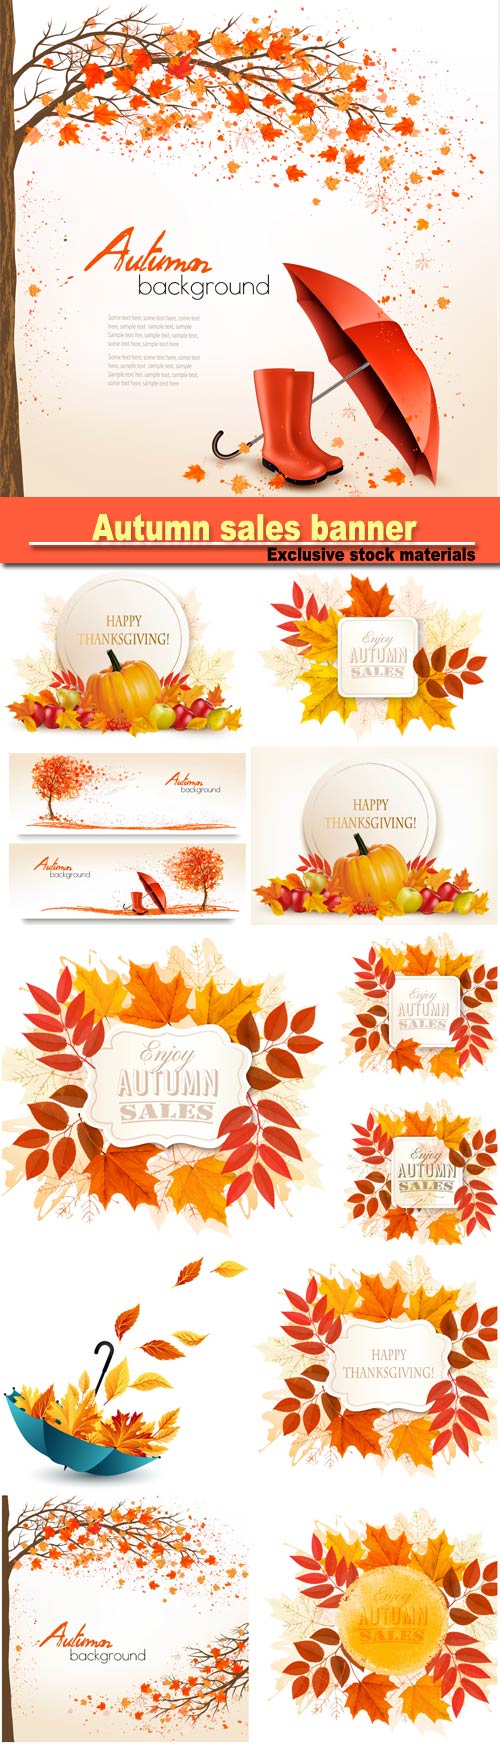 Autumn sales banner with colorful leaves, happy Thanksgiving background